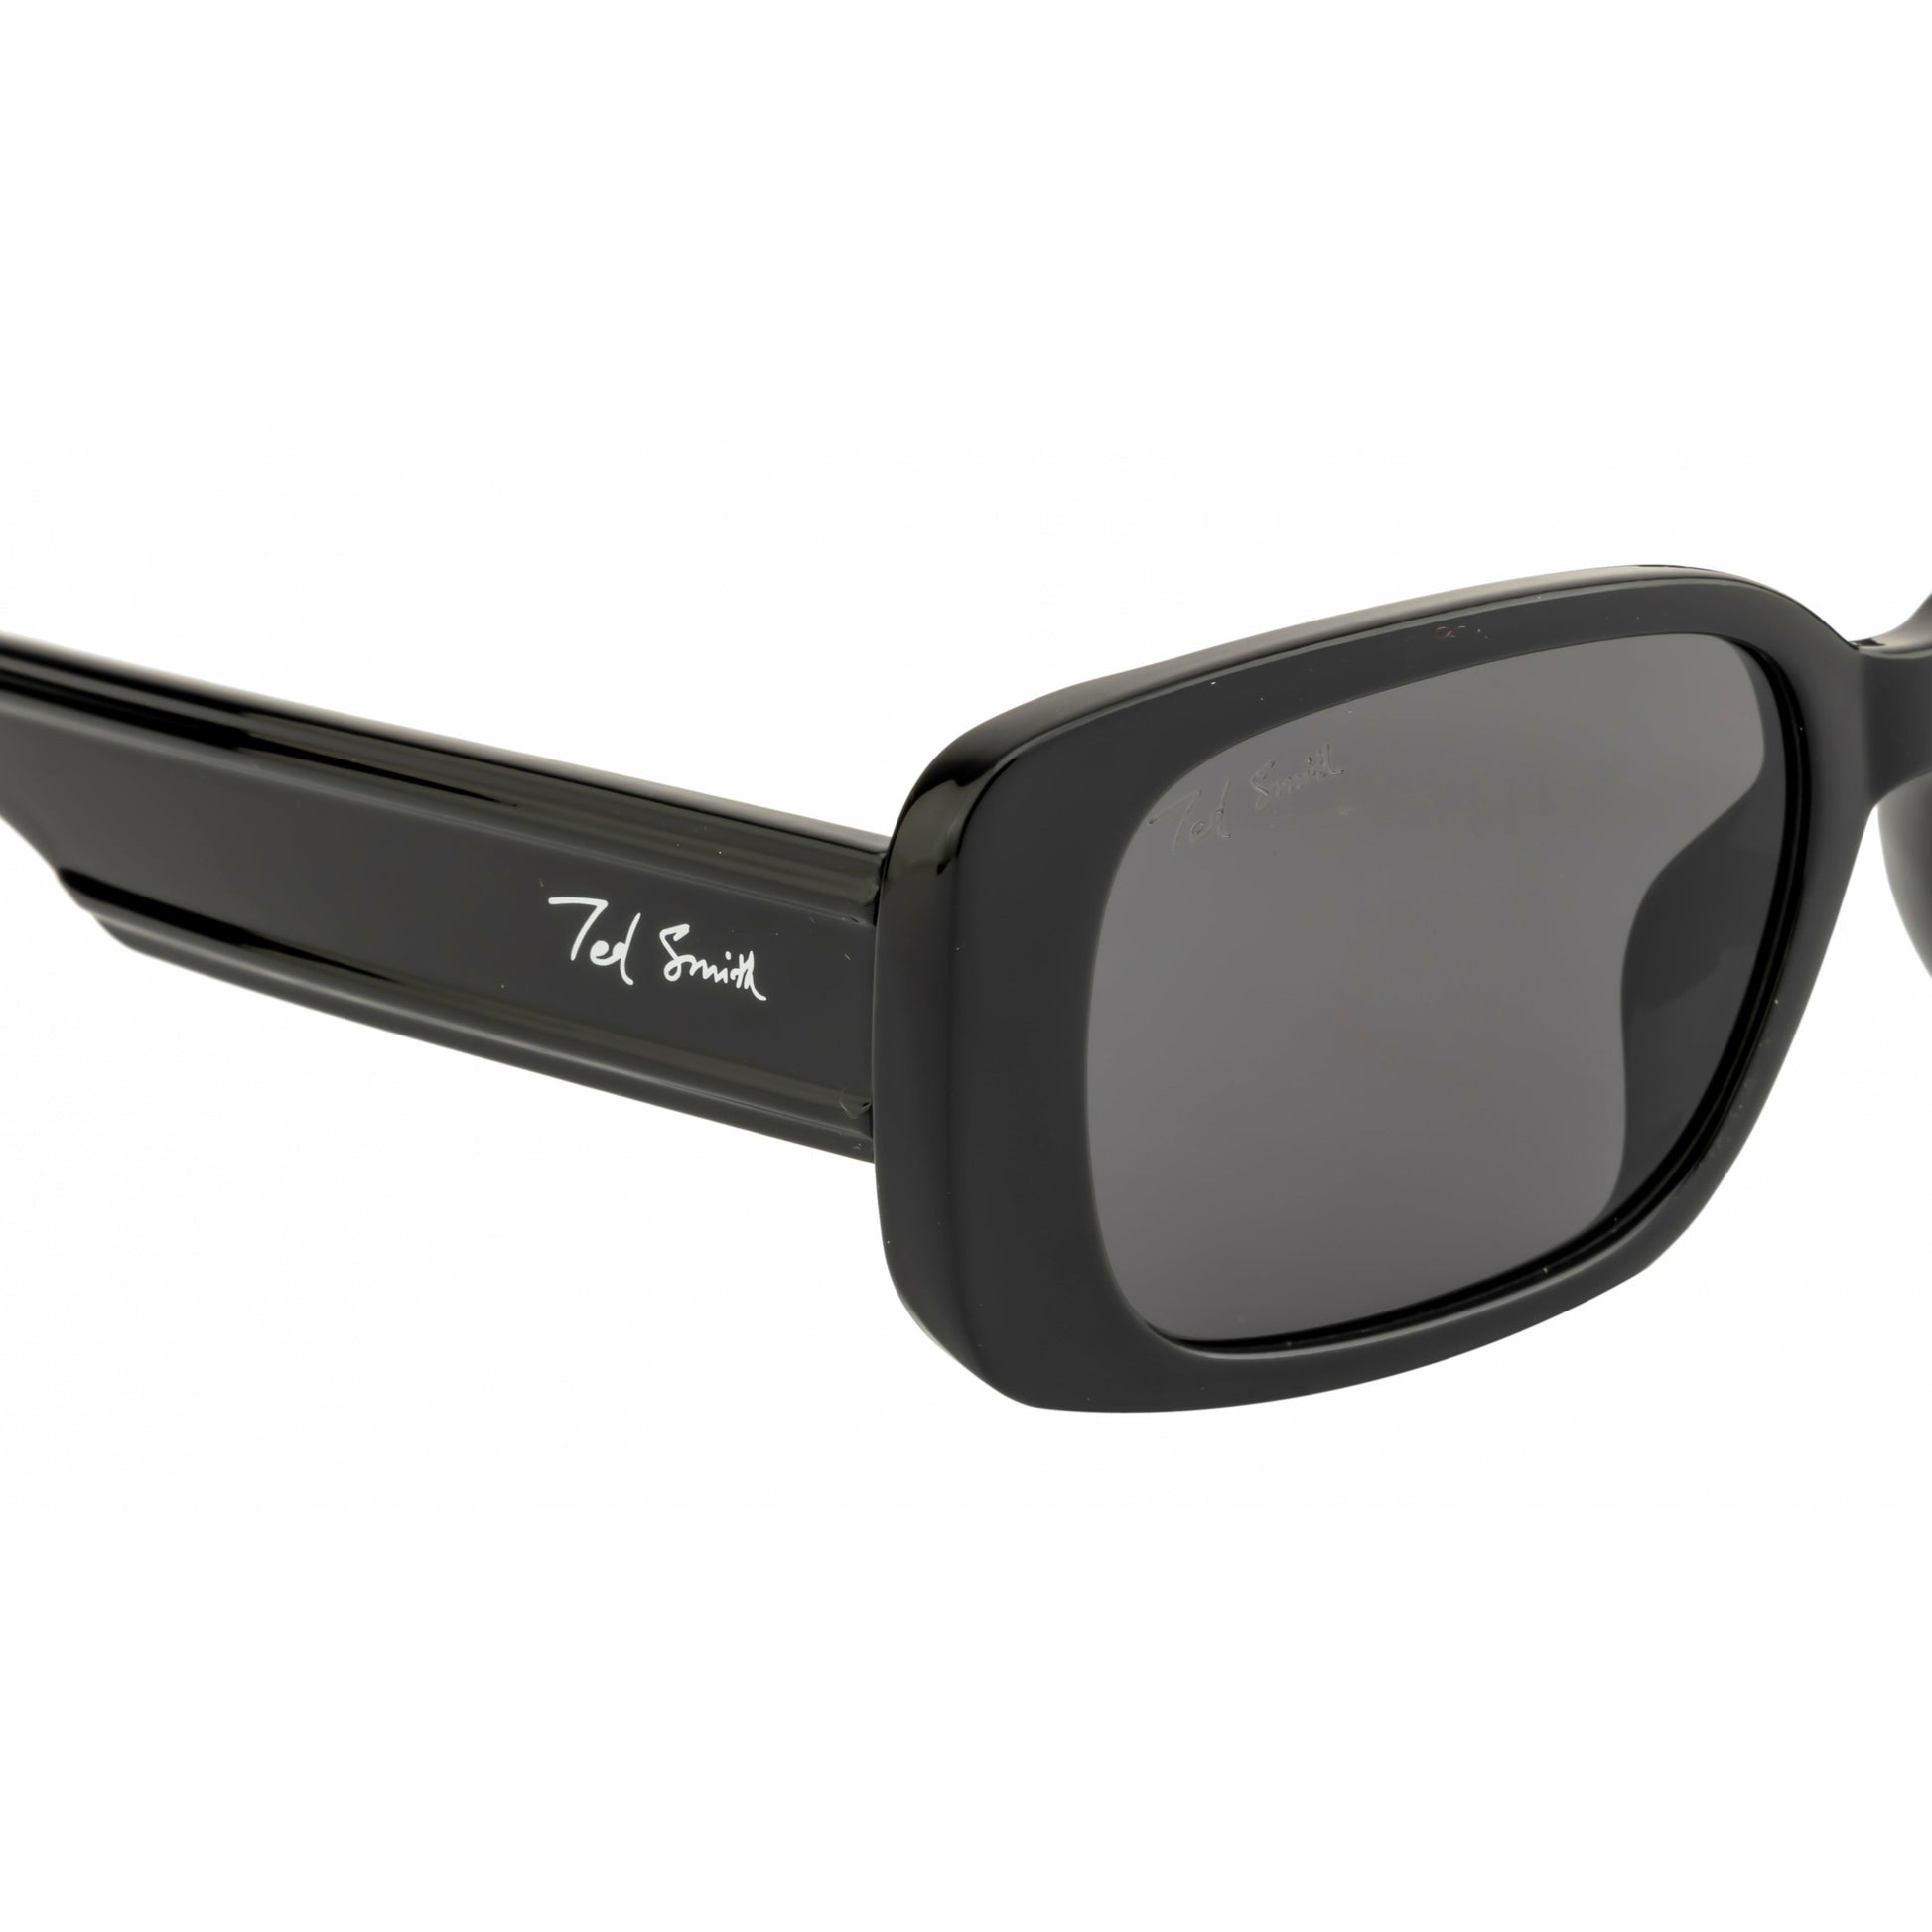 MERLOT SQUARE SUNGLASSES BY TED SMITH, FOR MEN & WOMEN